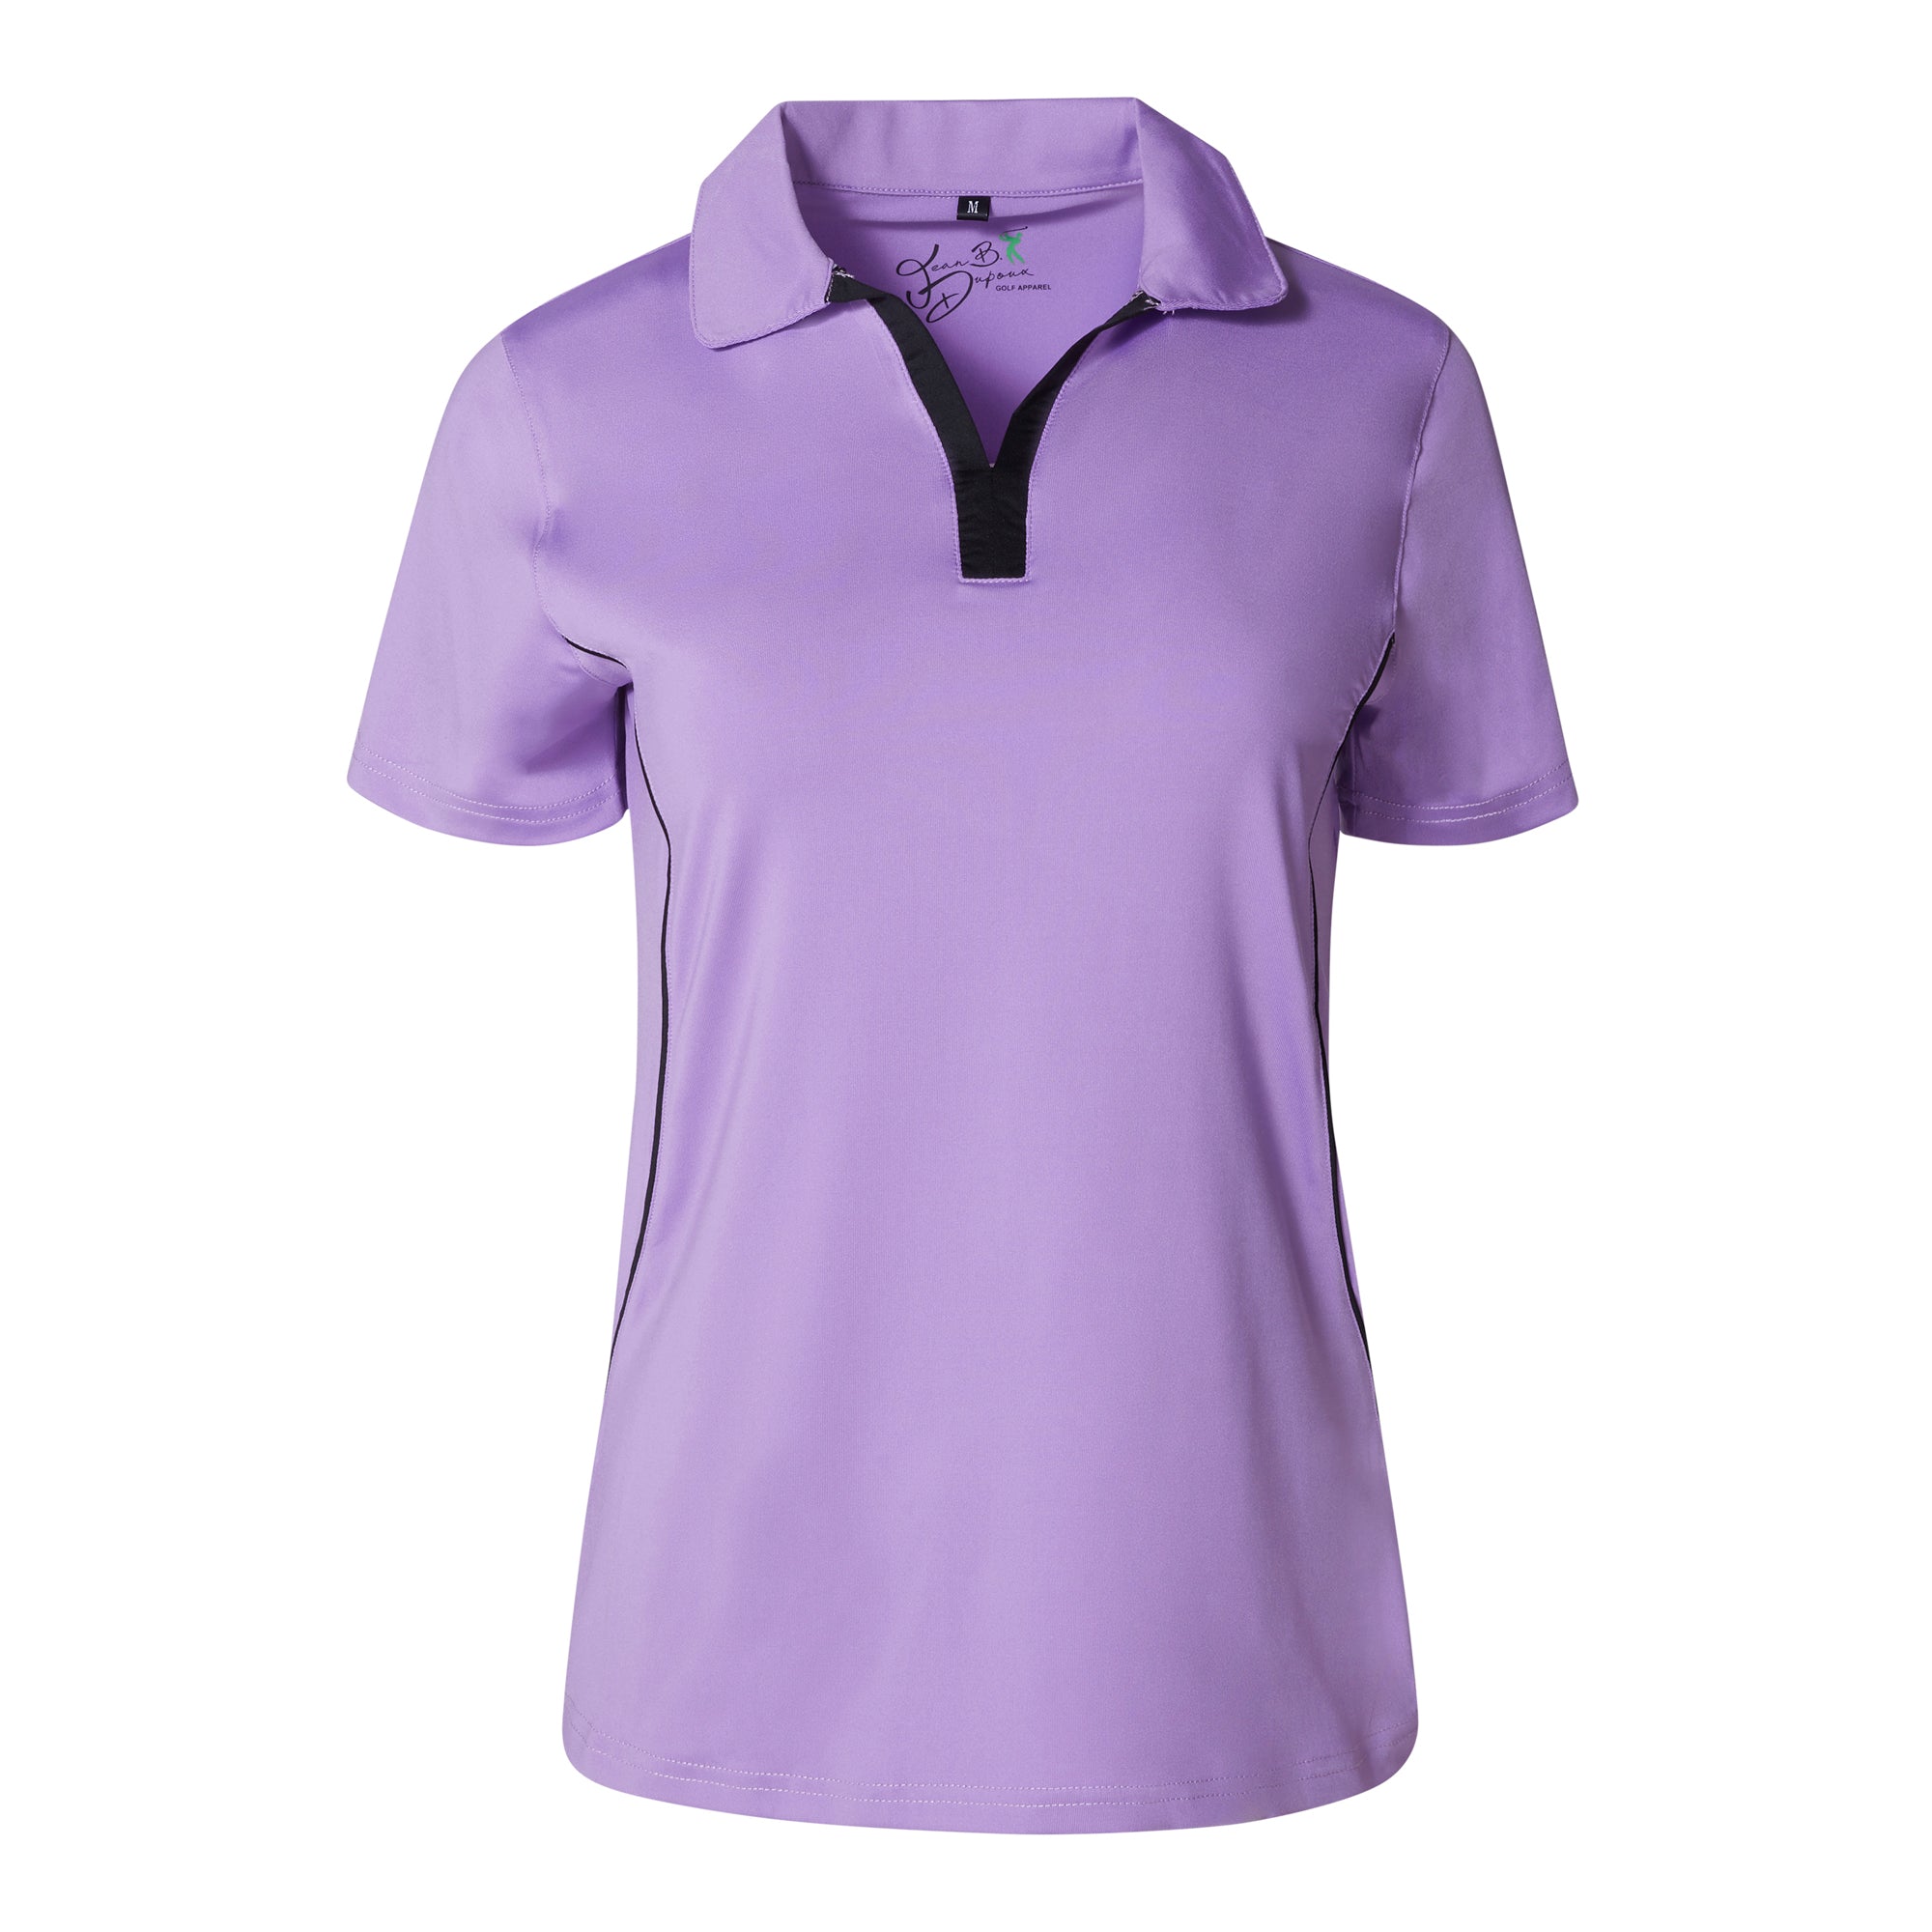 Short Sleeve Women Golf Shirts with Free Golf Hat | 88% Polyester and 12% Spandex Shirts for Women - Style 6659B - My Golf Shirts